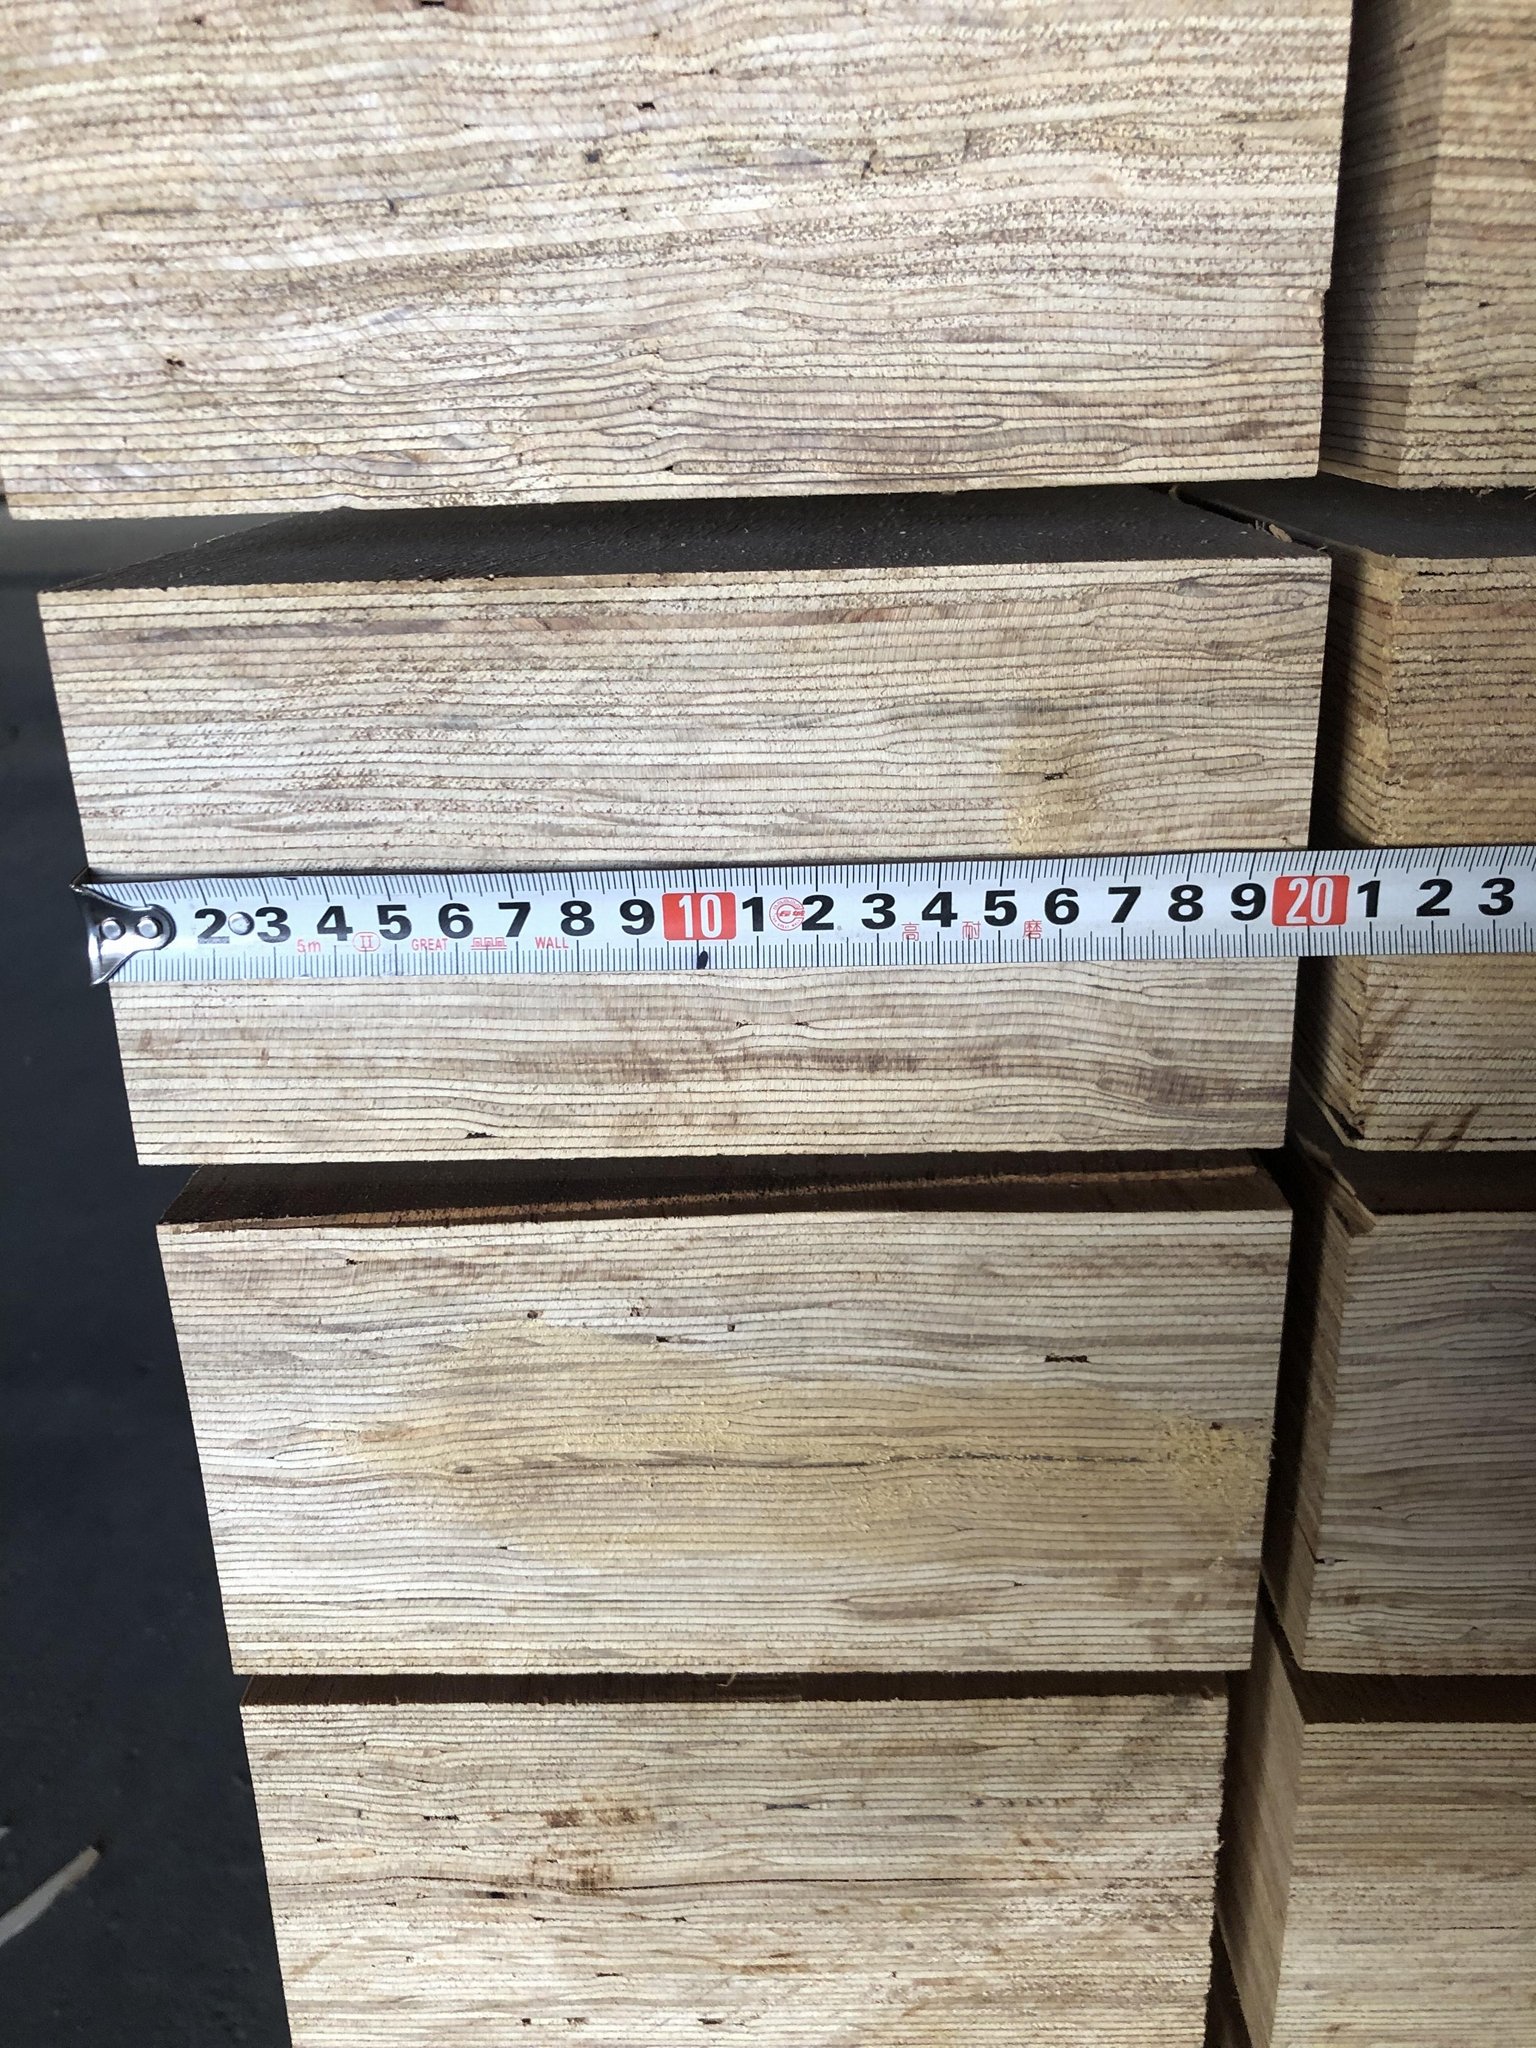 80mm Packing grade plywood LVL wood for sale online 5